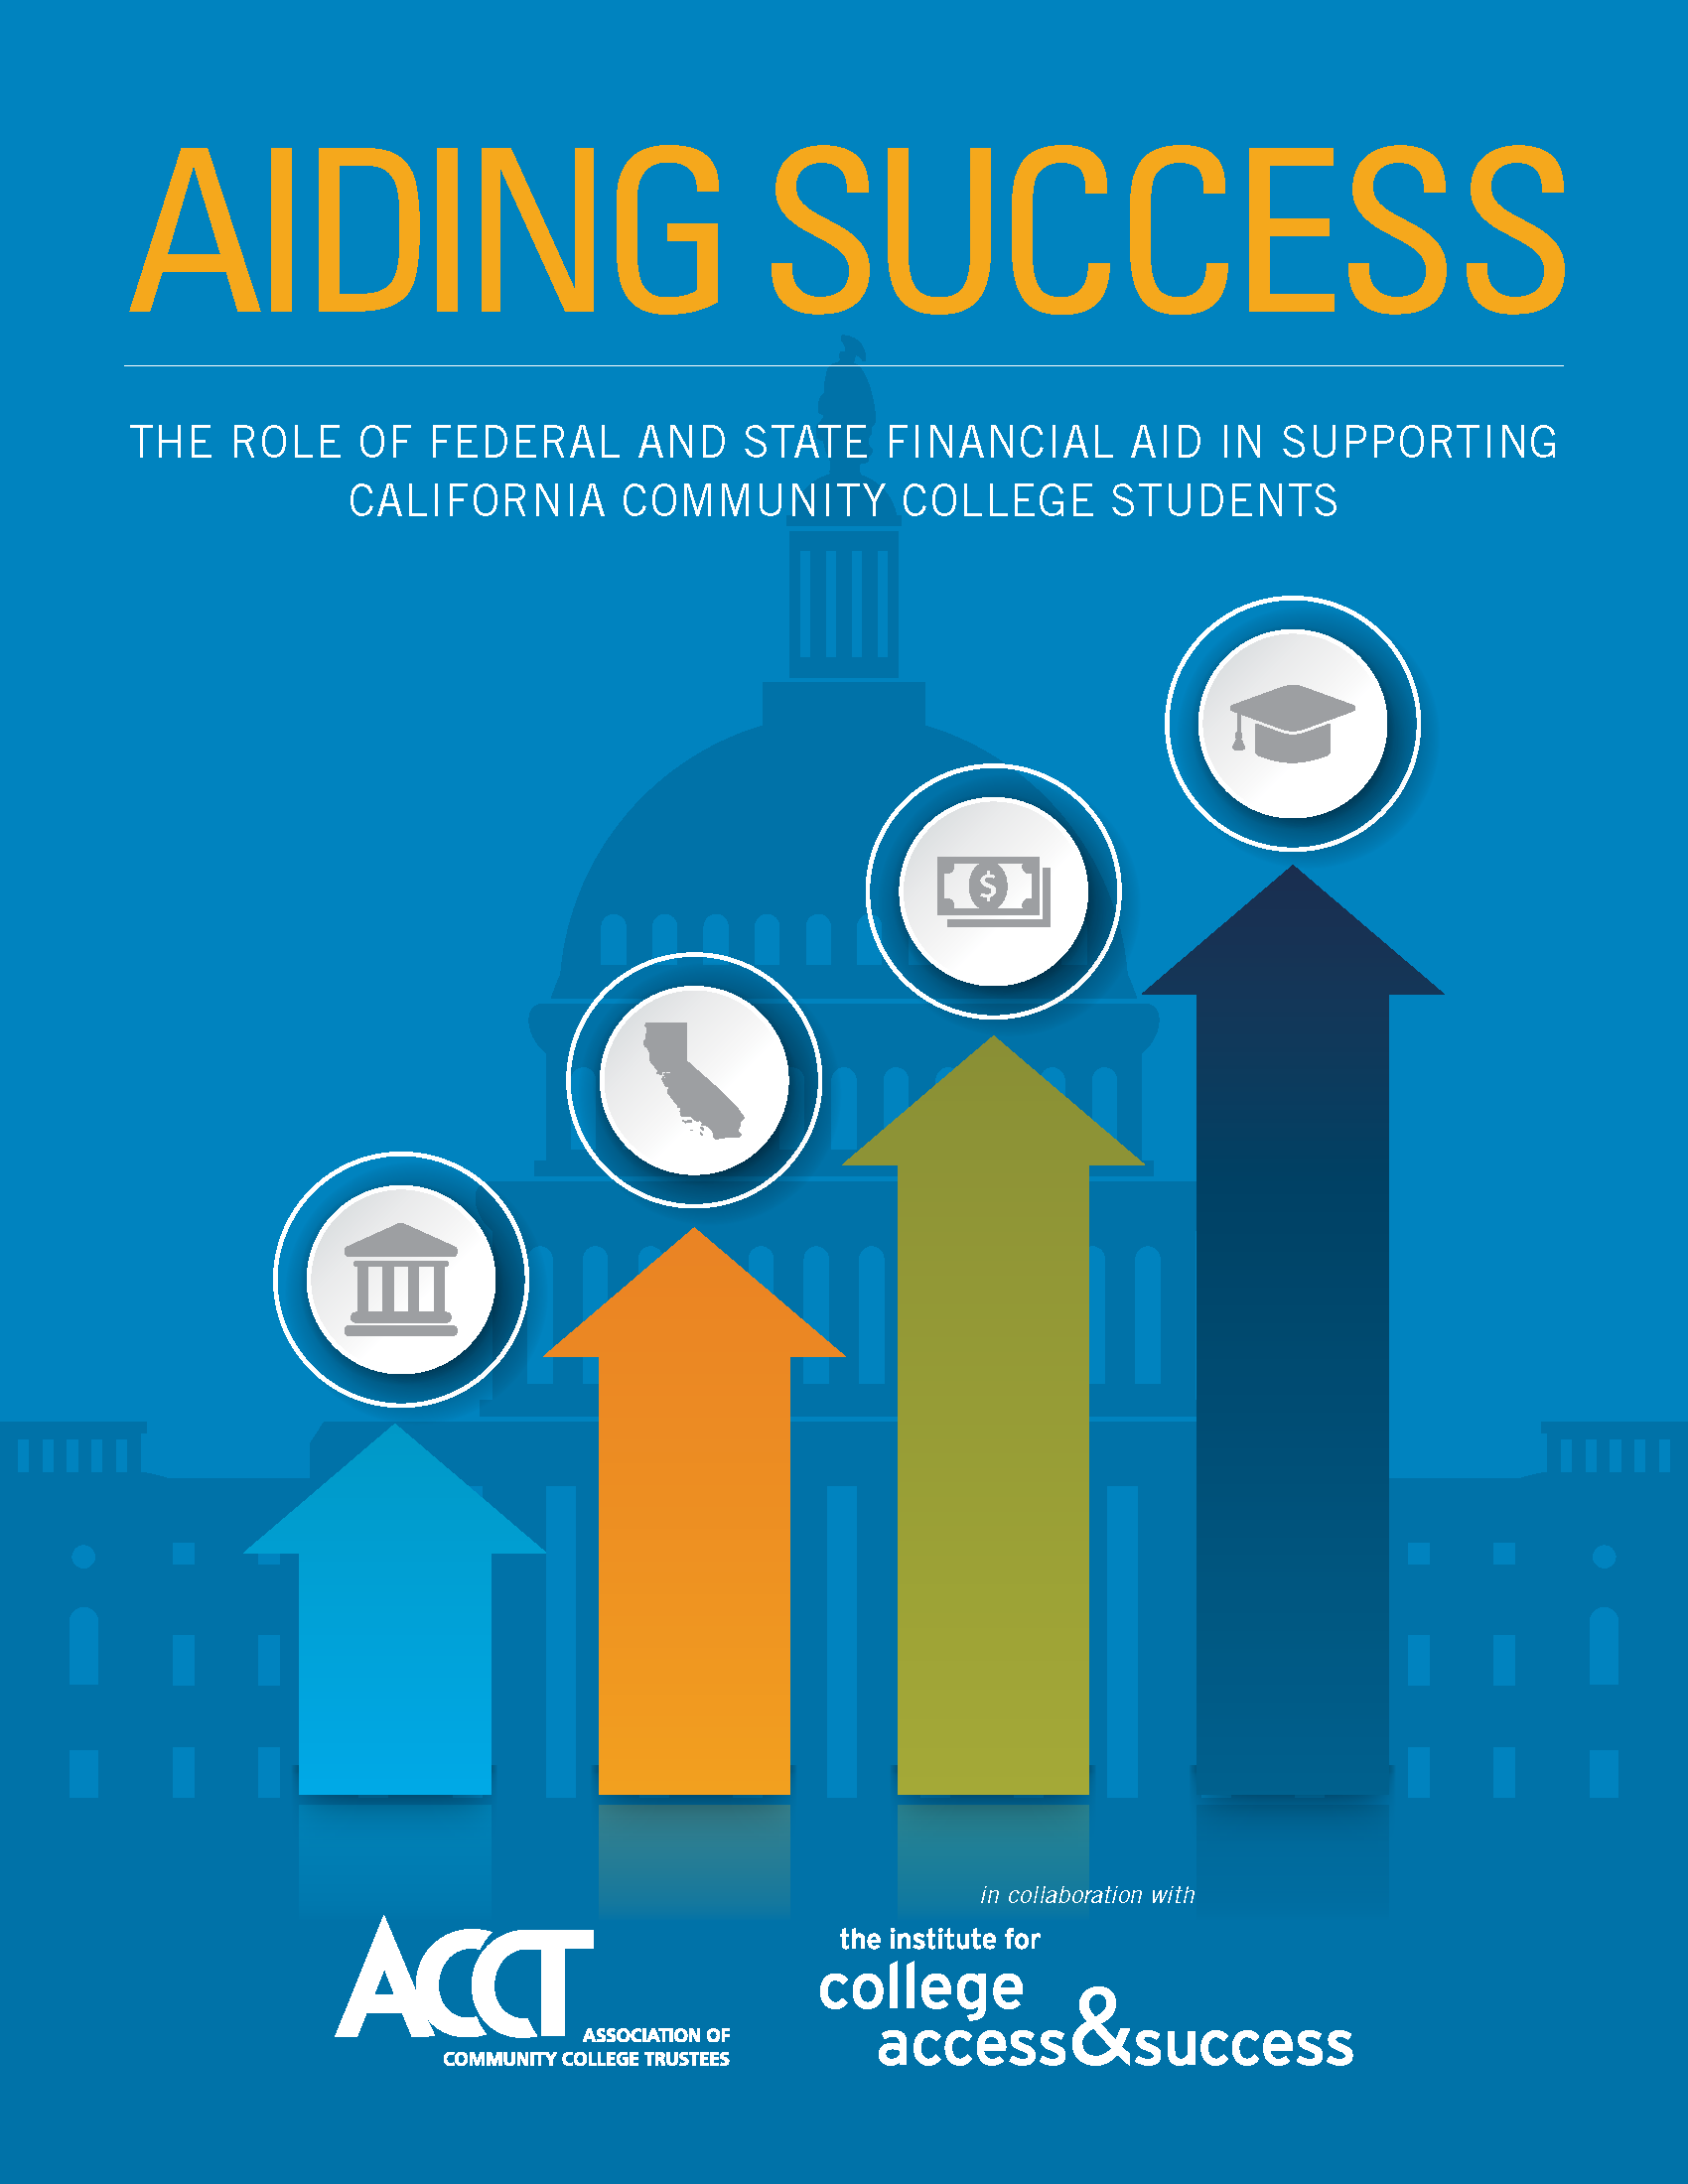 Aiding Success: The Role of Federal and State Financial Aid in Supporting California's Community Colleges